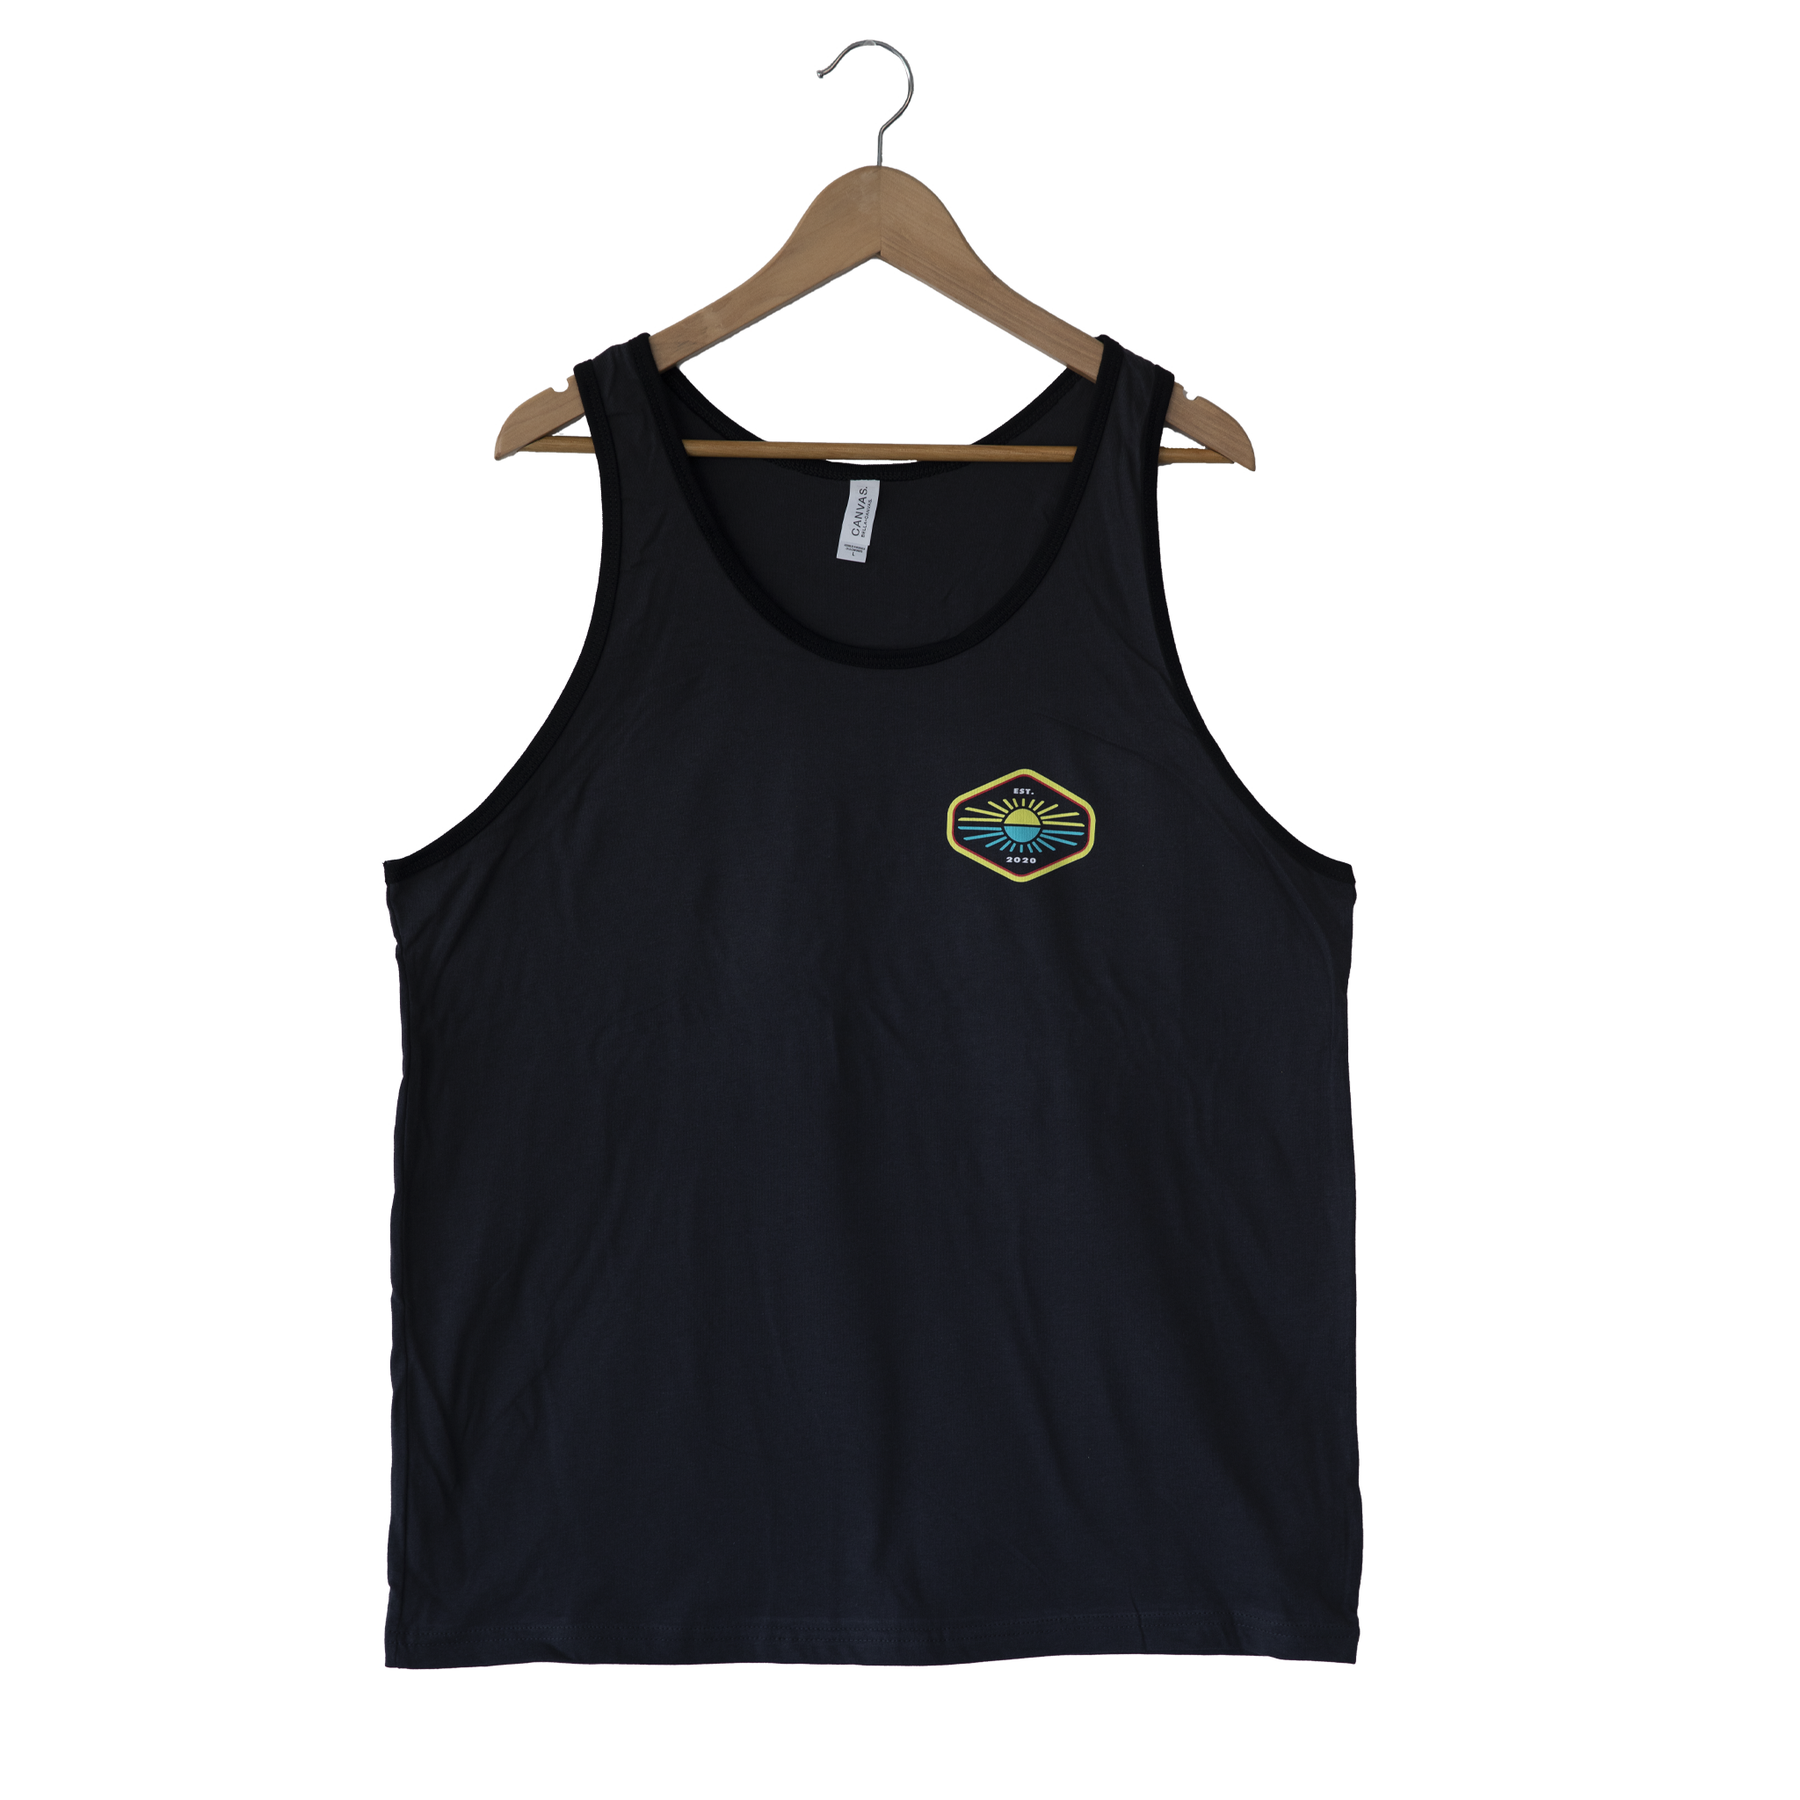 Tank Tops Extra Large / Dusty Blue